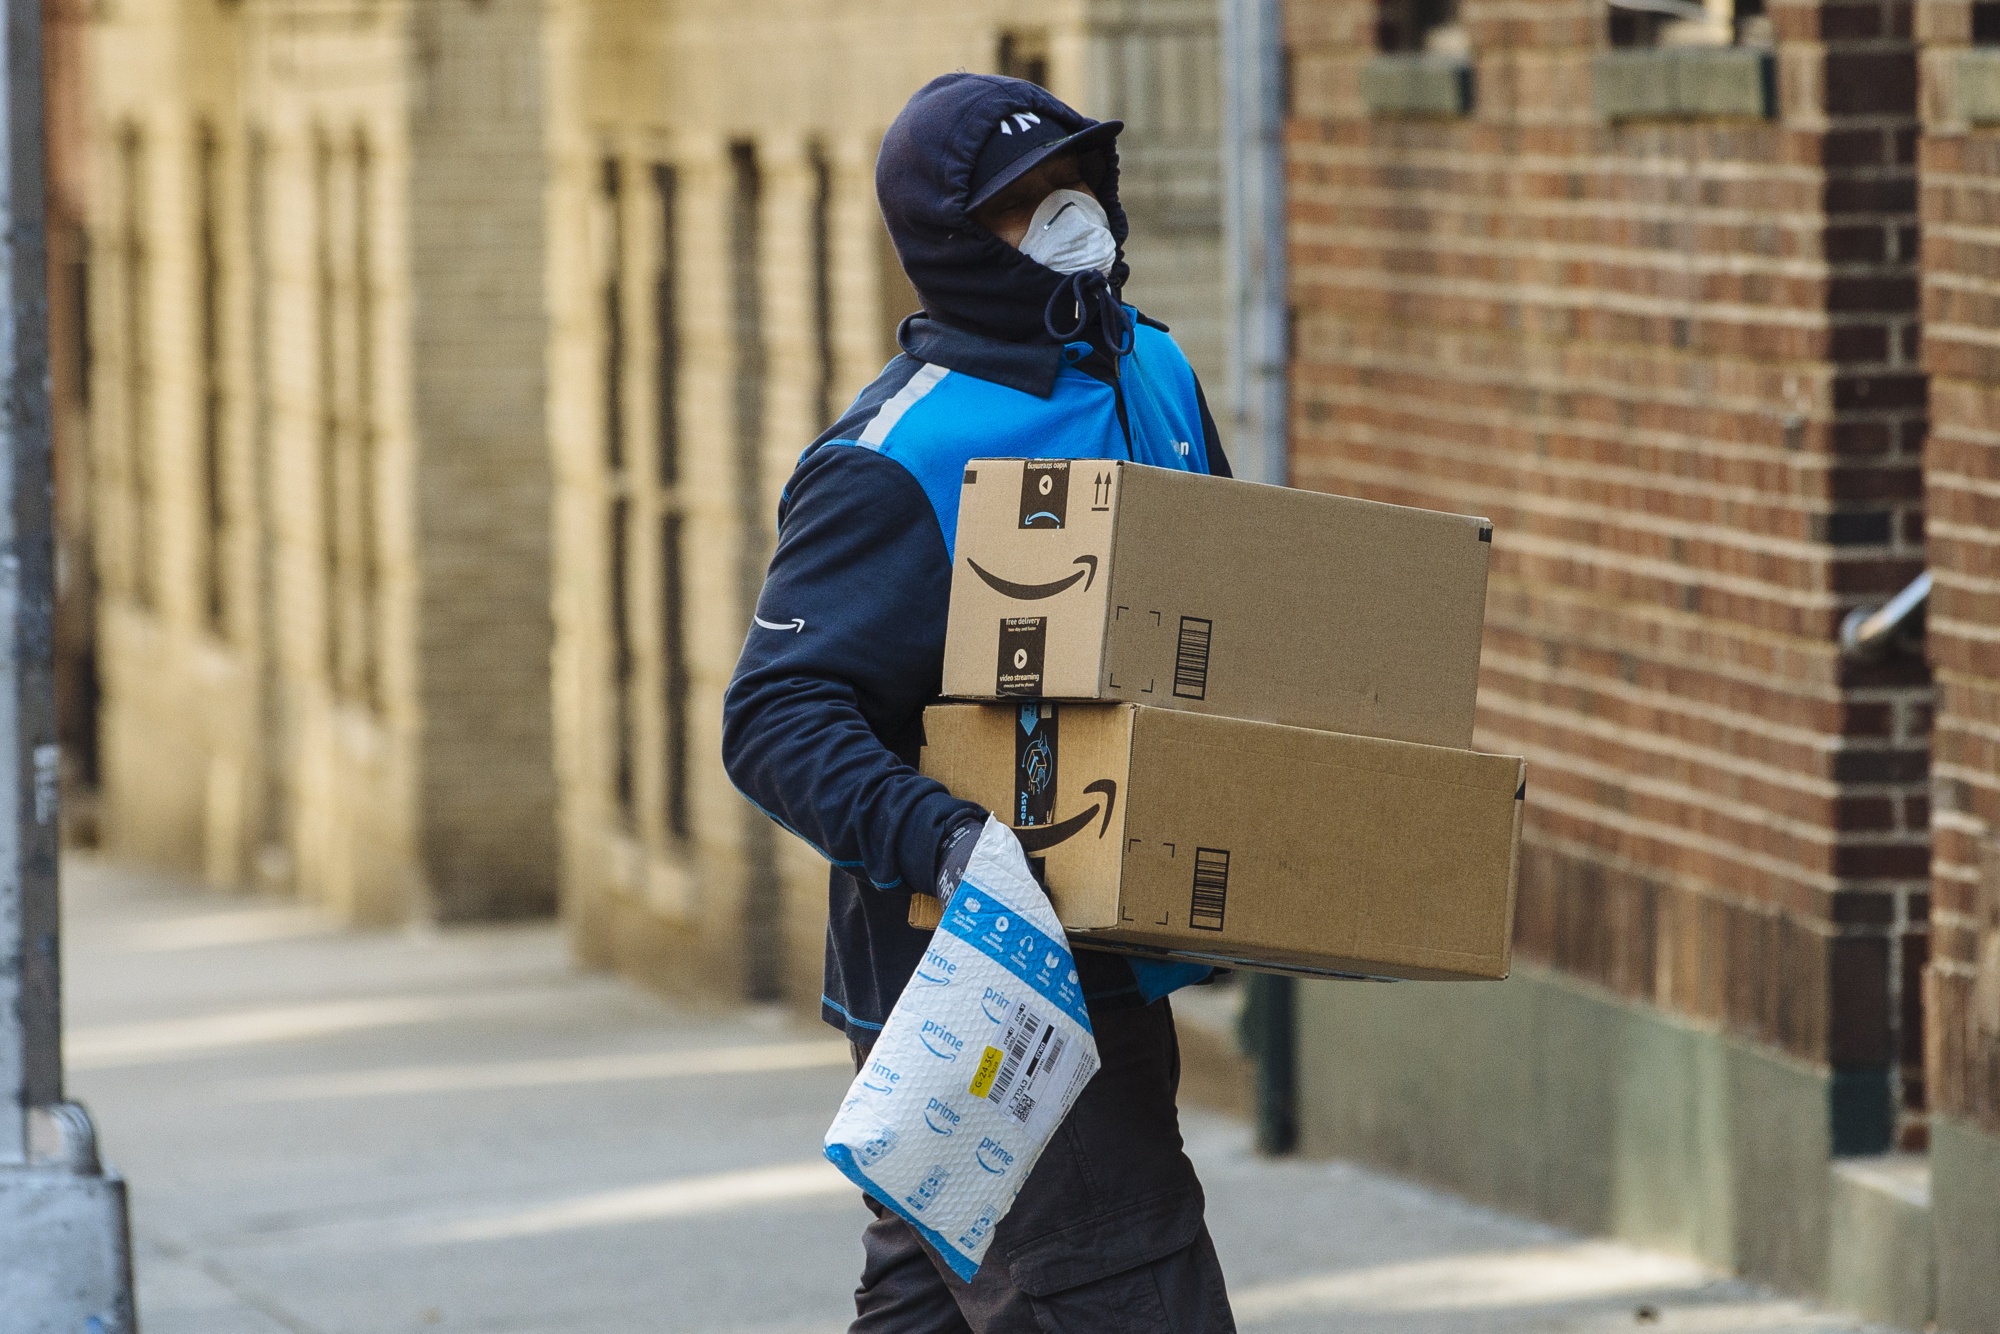 A worker&nbsp;carries Amazon.com&nbsp;boxes during a delivery in the Bronx, New York, on&nbsp;March 26.&nbsp;